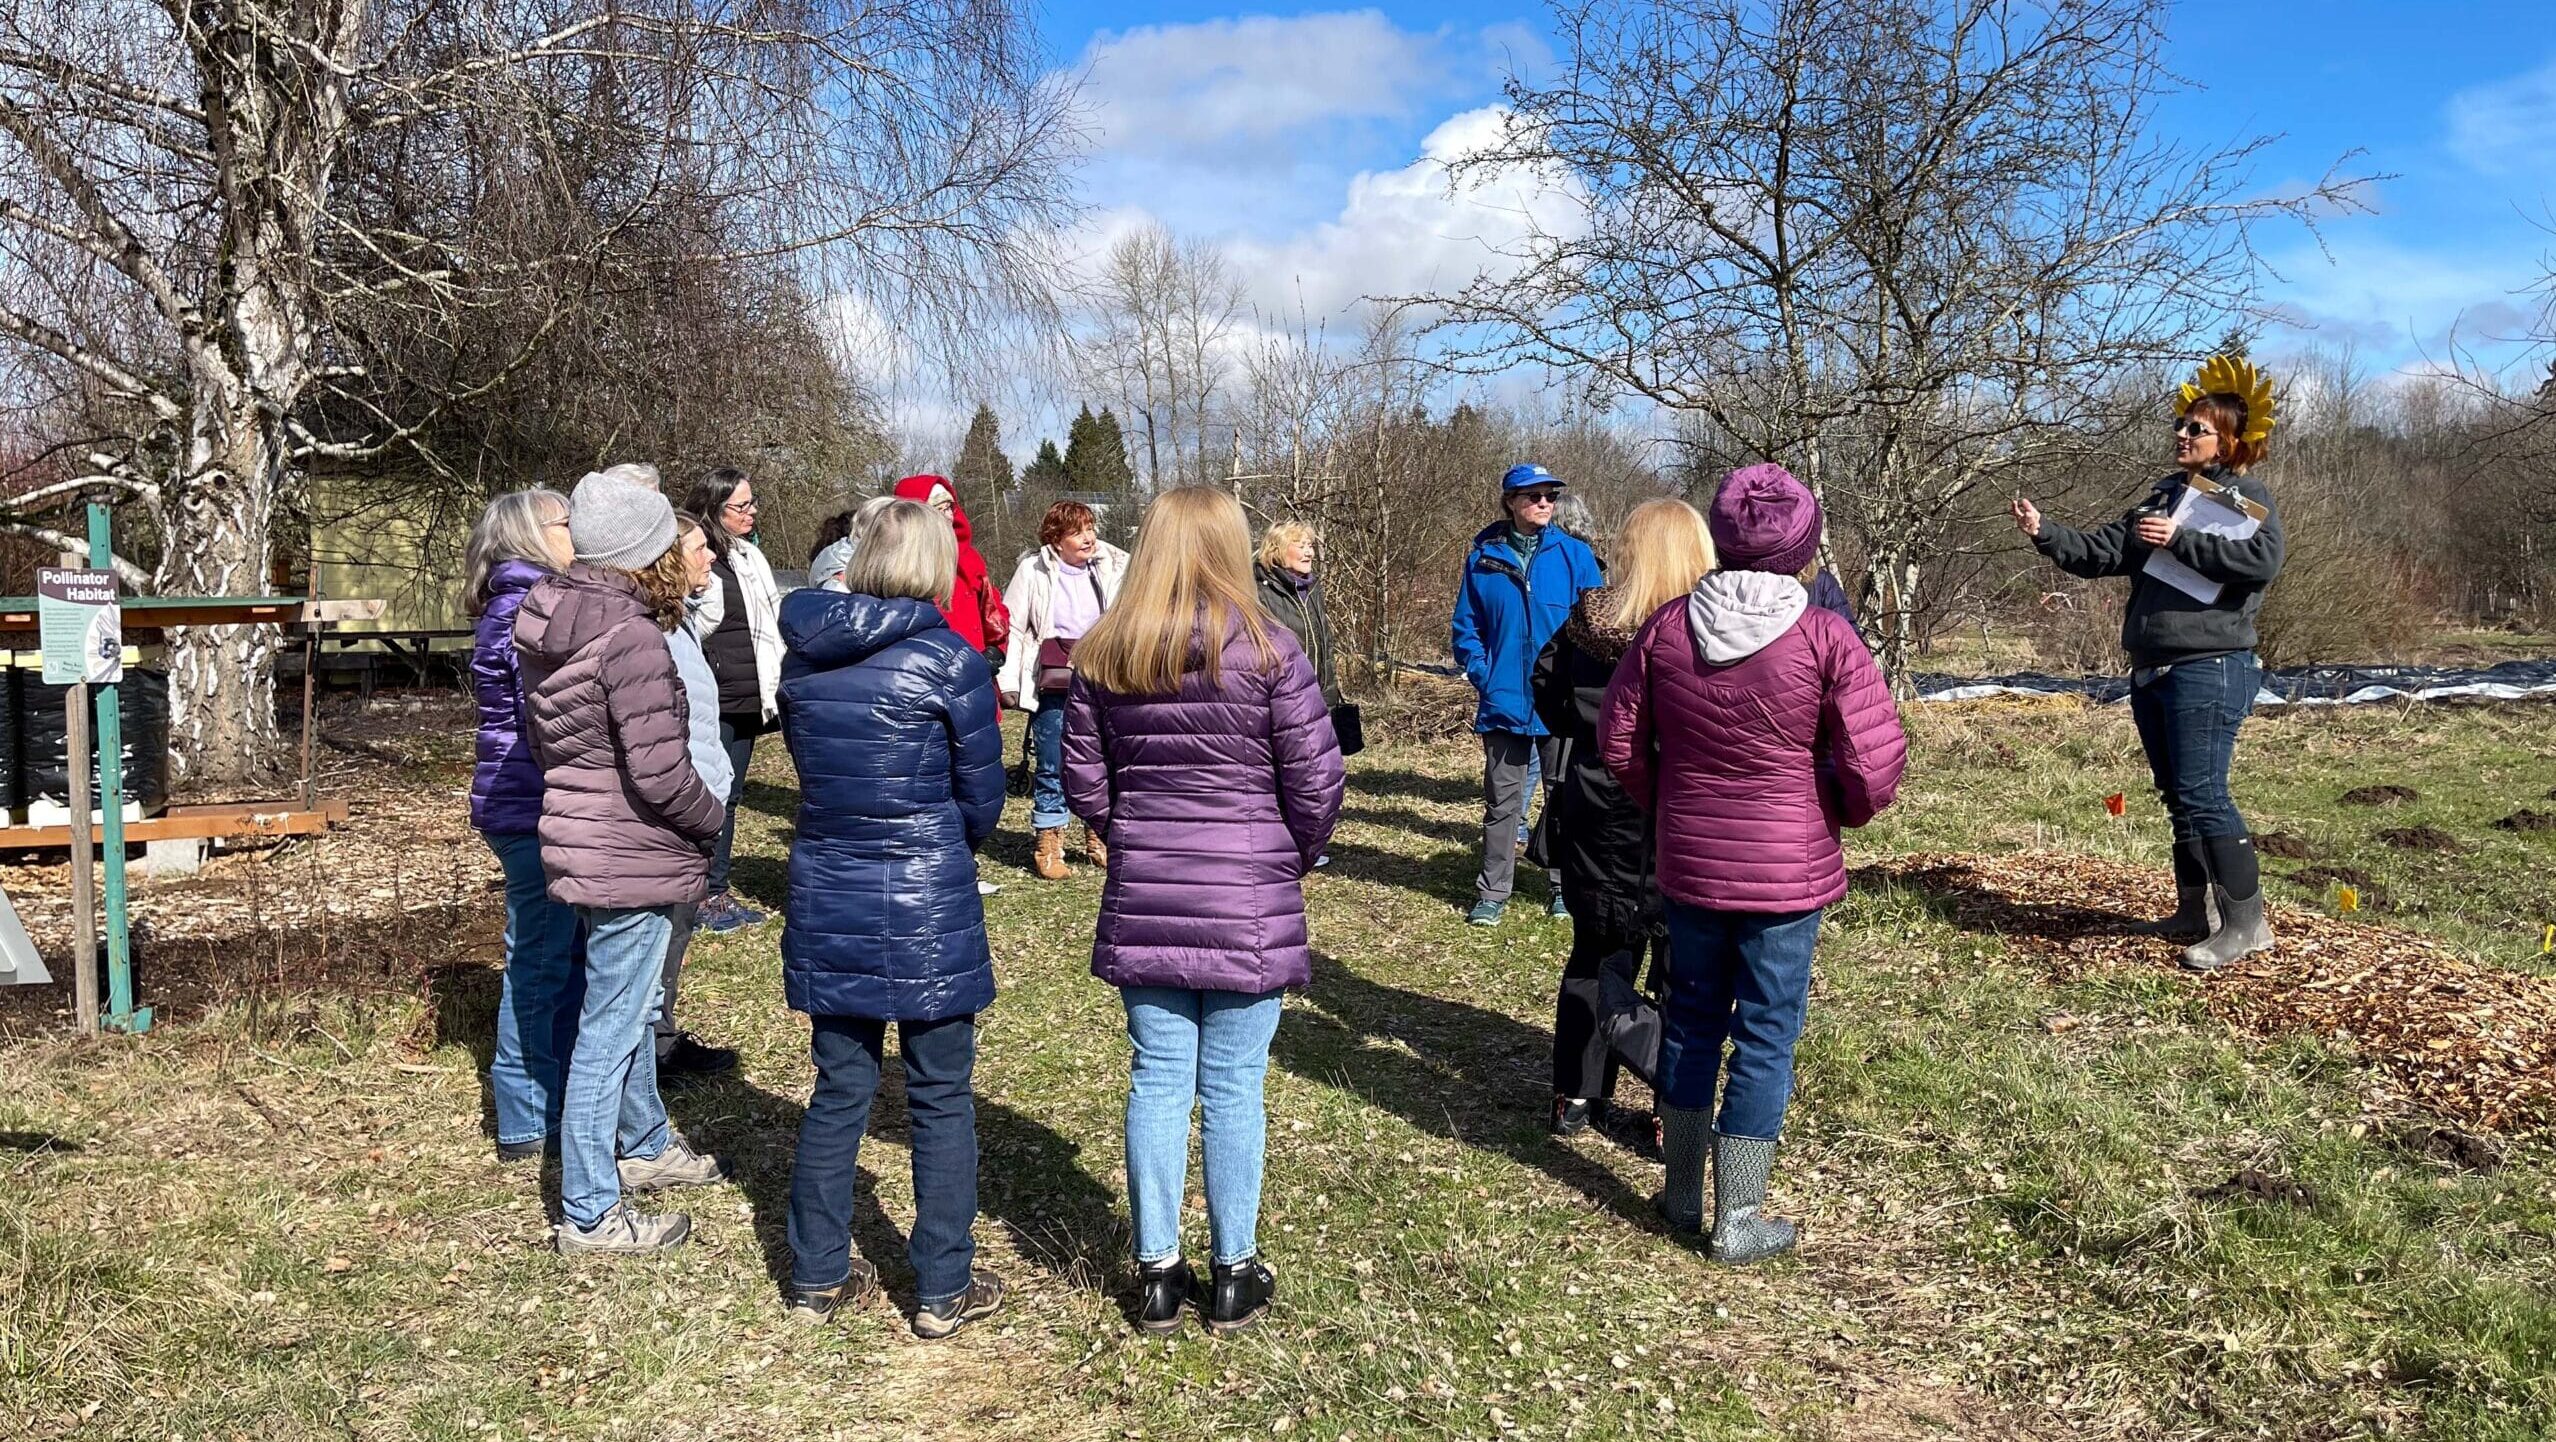 An early spring guided tour of the 21 Acres farm